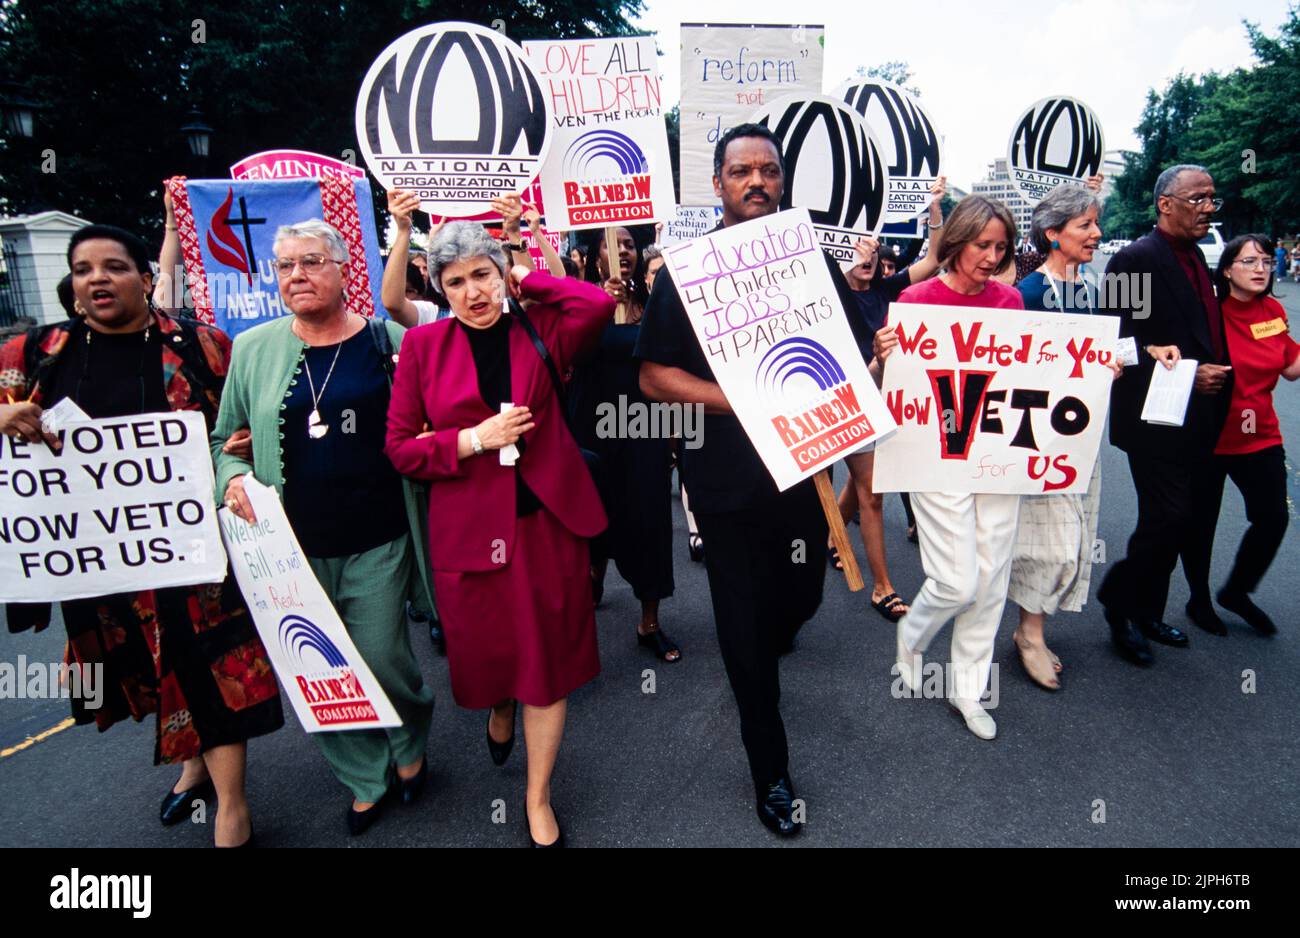 The Rev. Jesse Jackson, of the Rainbow Coalition, center, Jill Ireland of NOW, right, and Eleanor Smeal of the Feminist Majority, left, lead a protest rally against the Republican welfare reform plan outside the White House, August 1, 1996 in Washington, D.C. Stock Photo